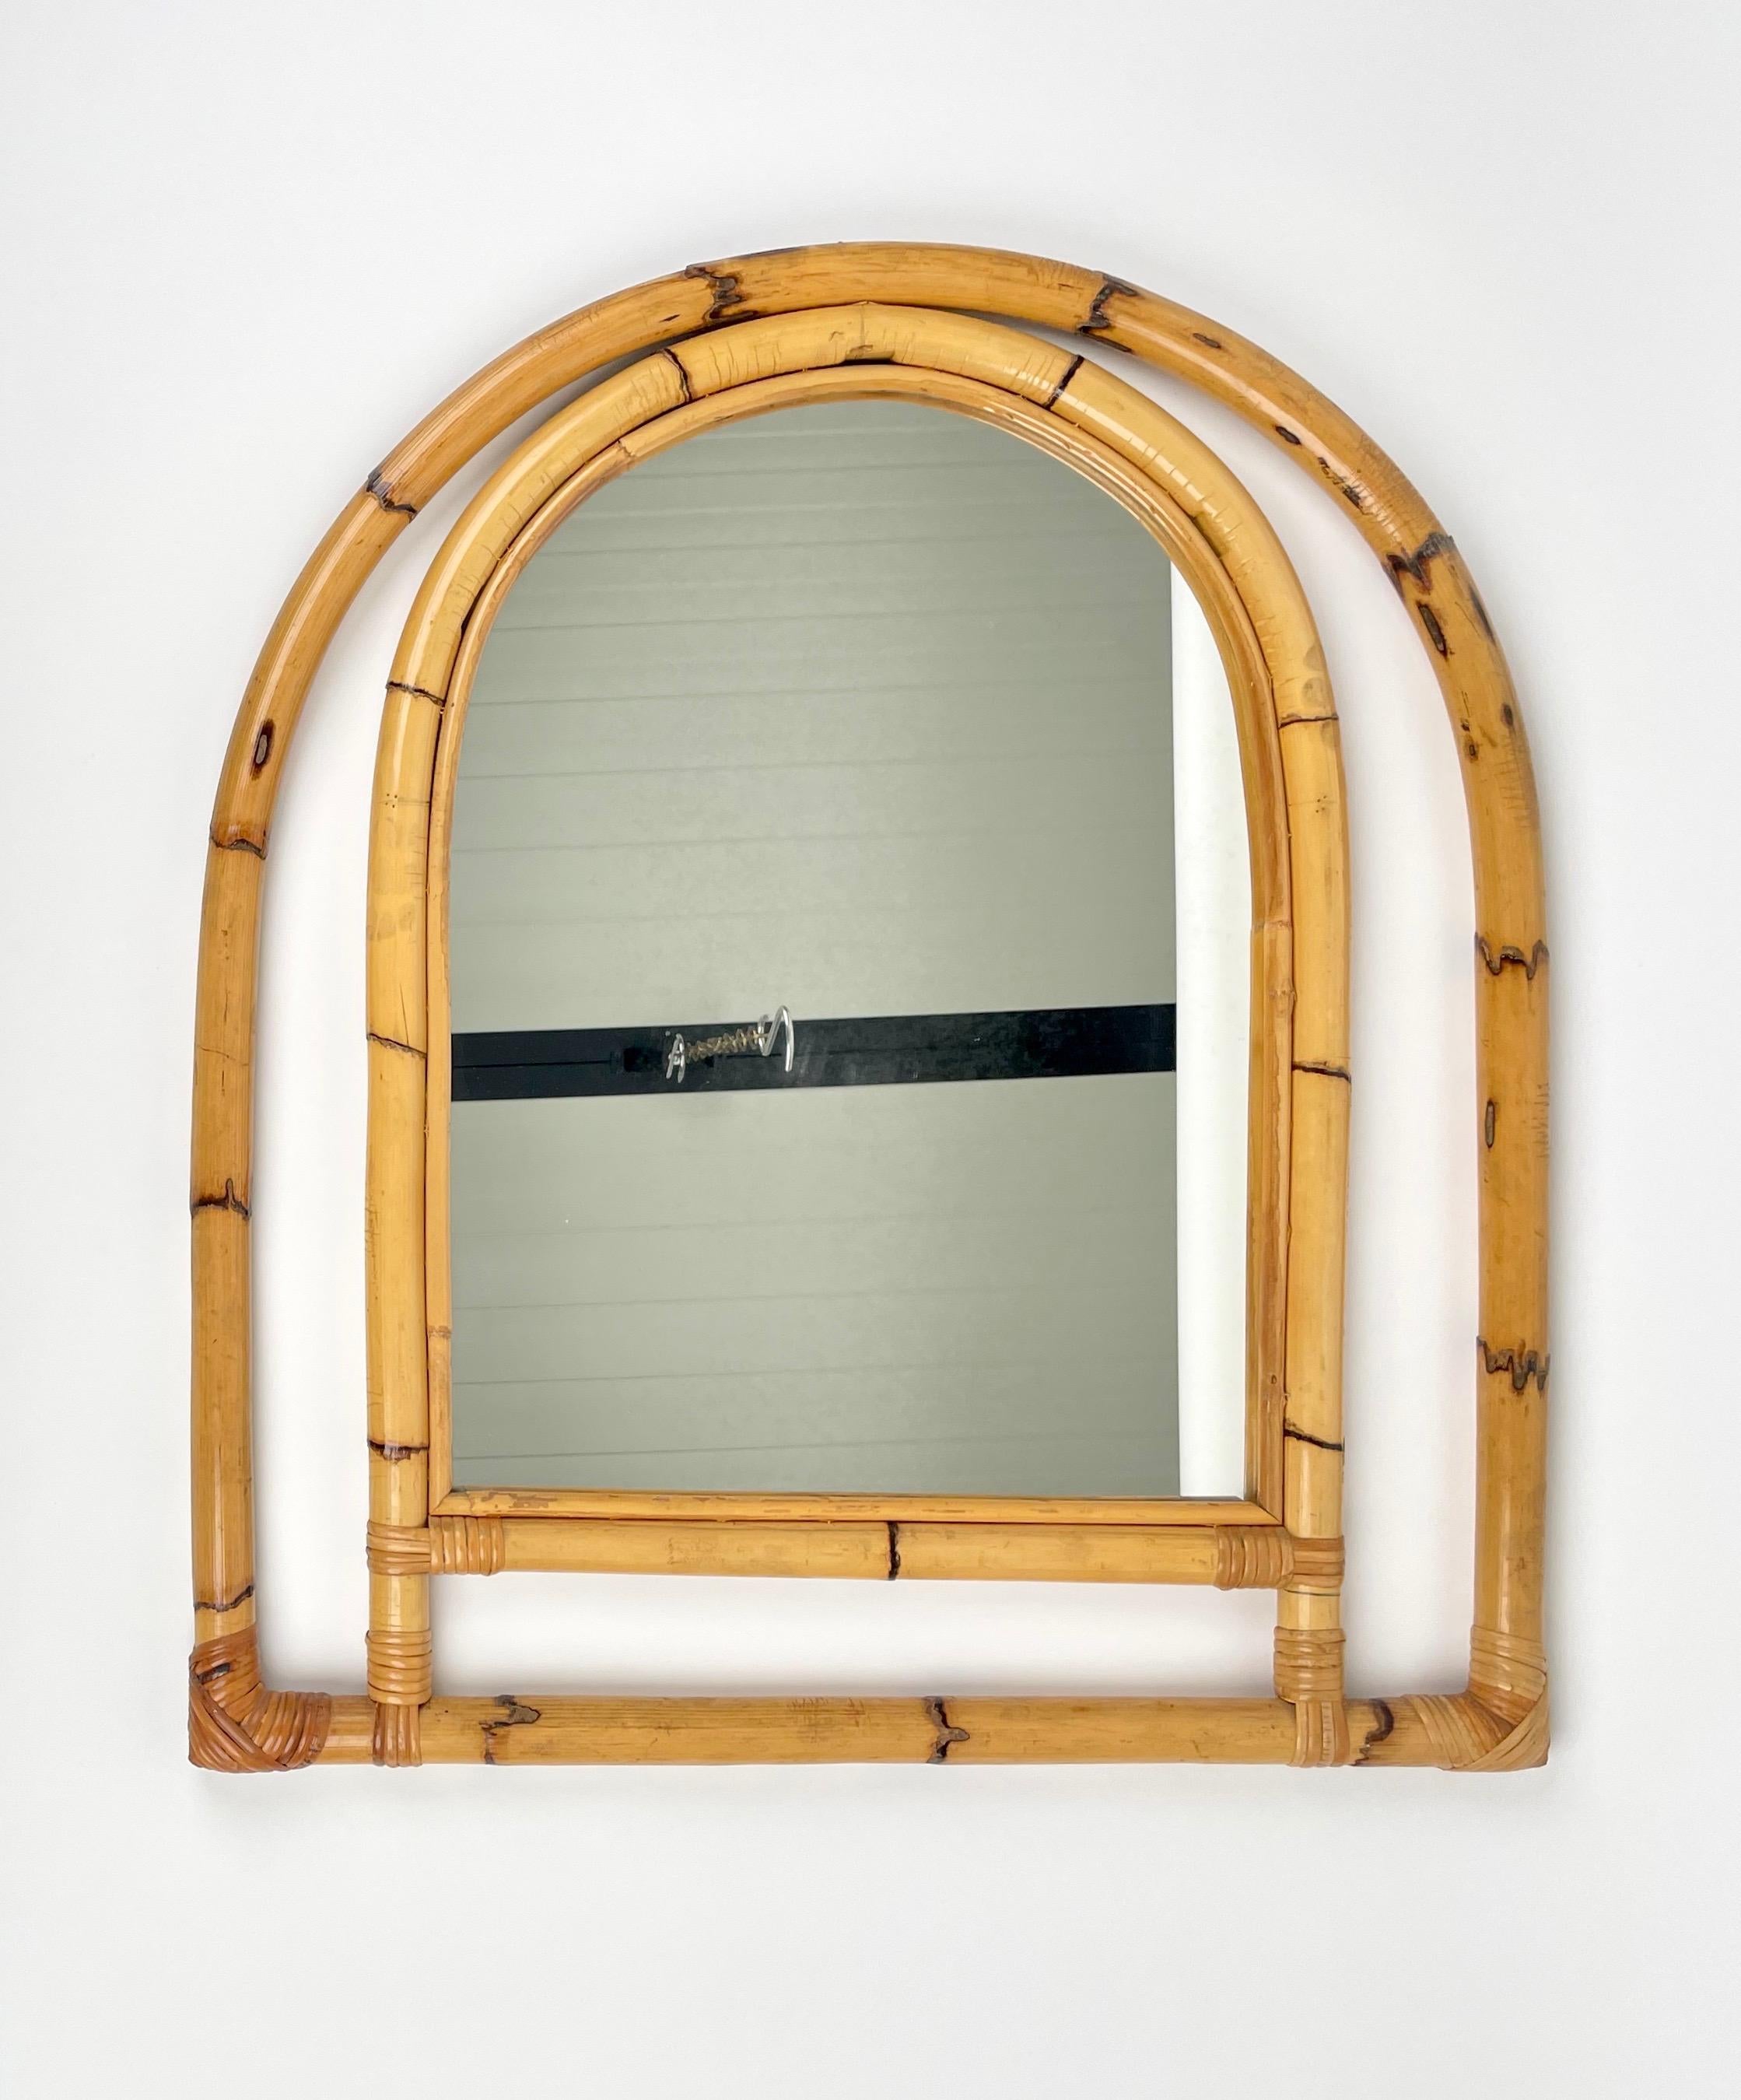 Arched wall mirror framed with bamboo and rattan.

Made in Italy in the 1970s.